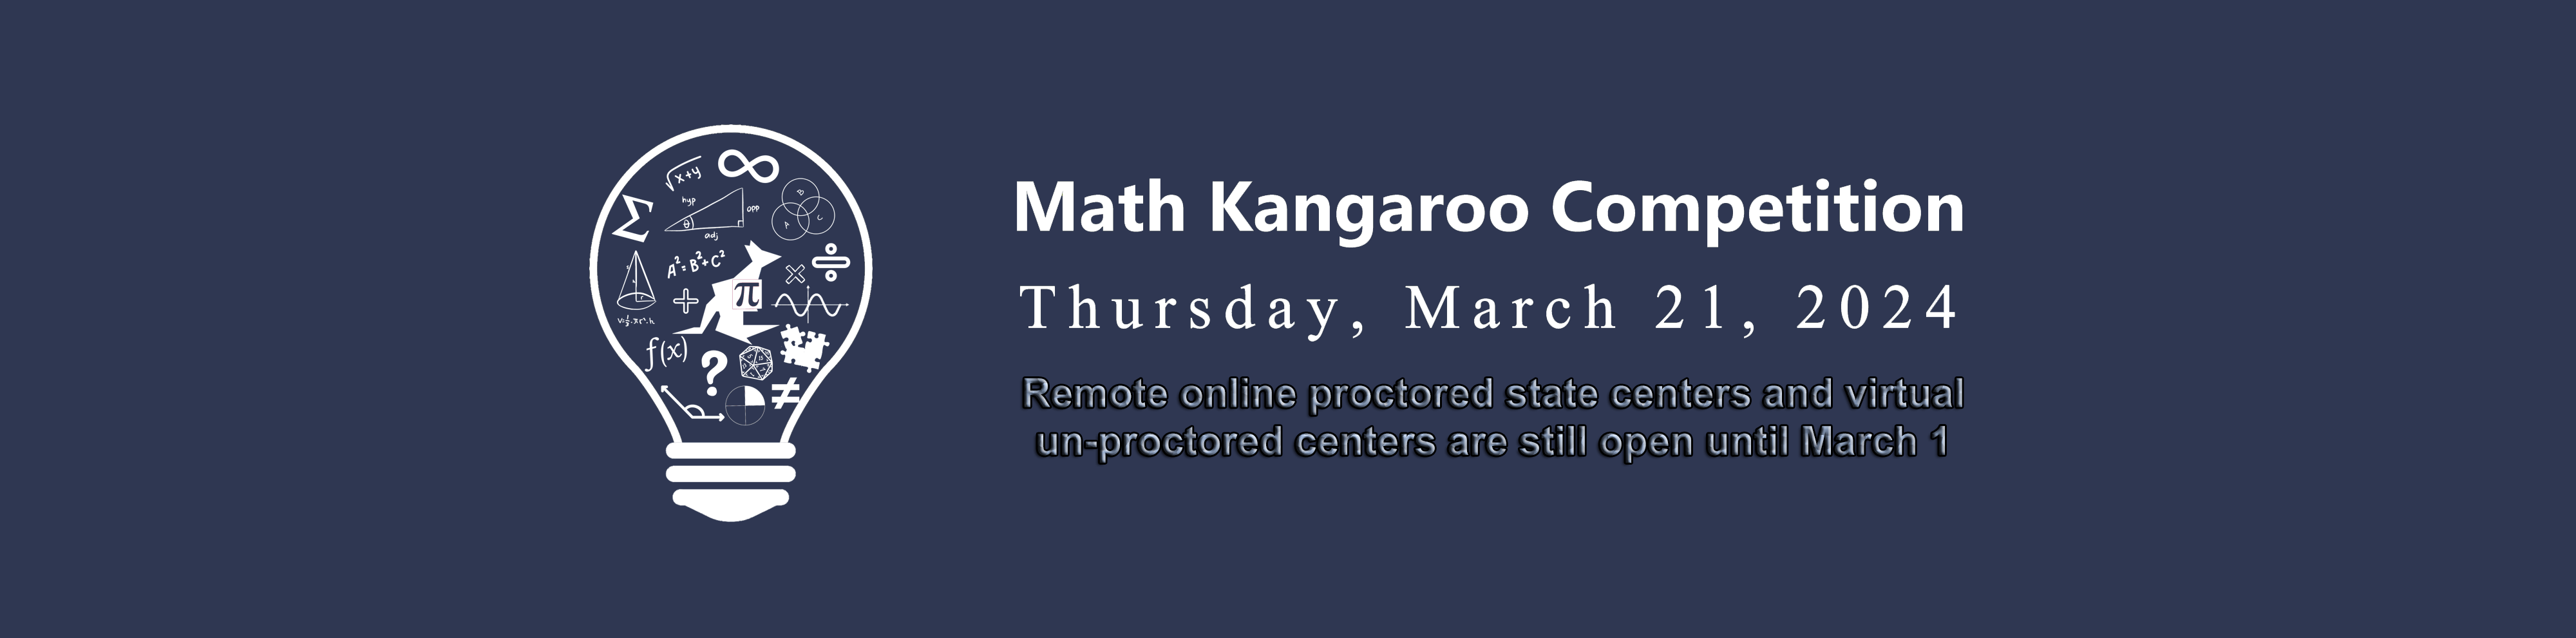 Math Kangaroo Int'l Competition in Mathematics Home Page